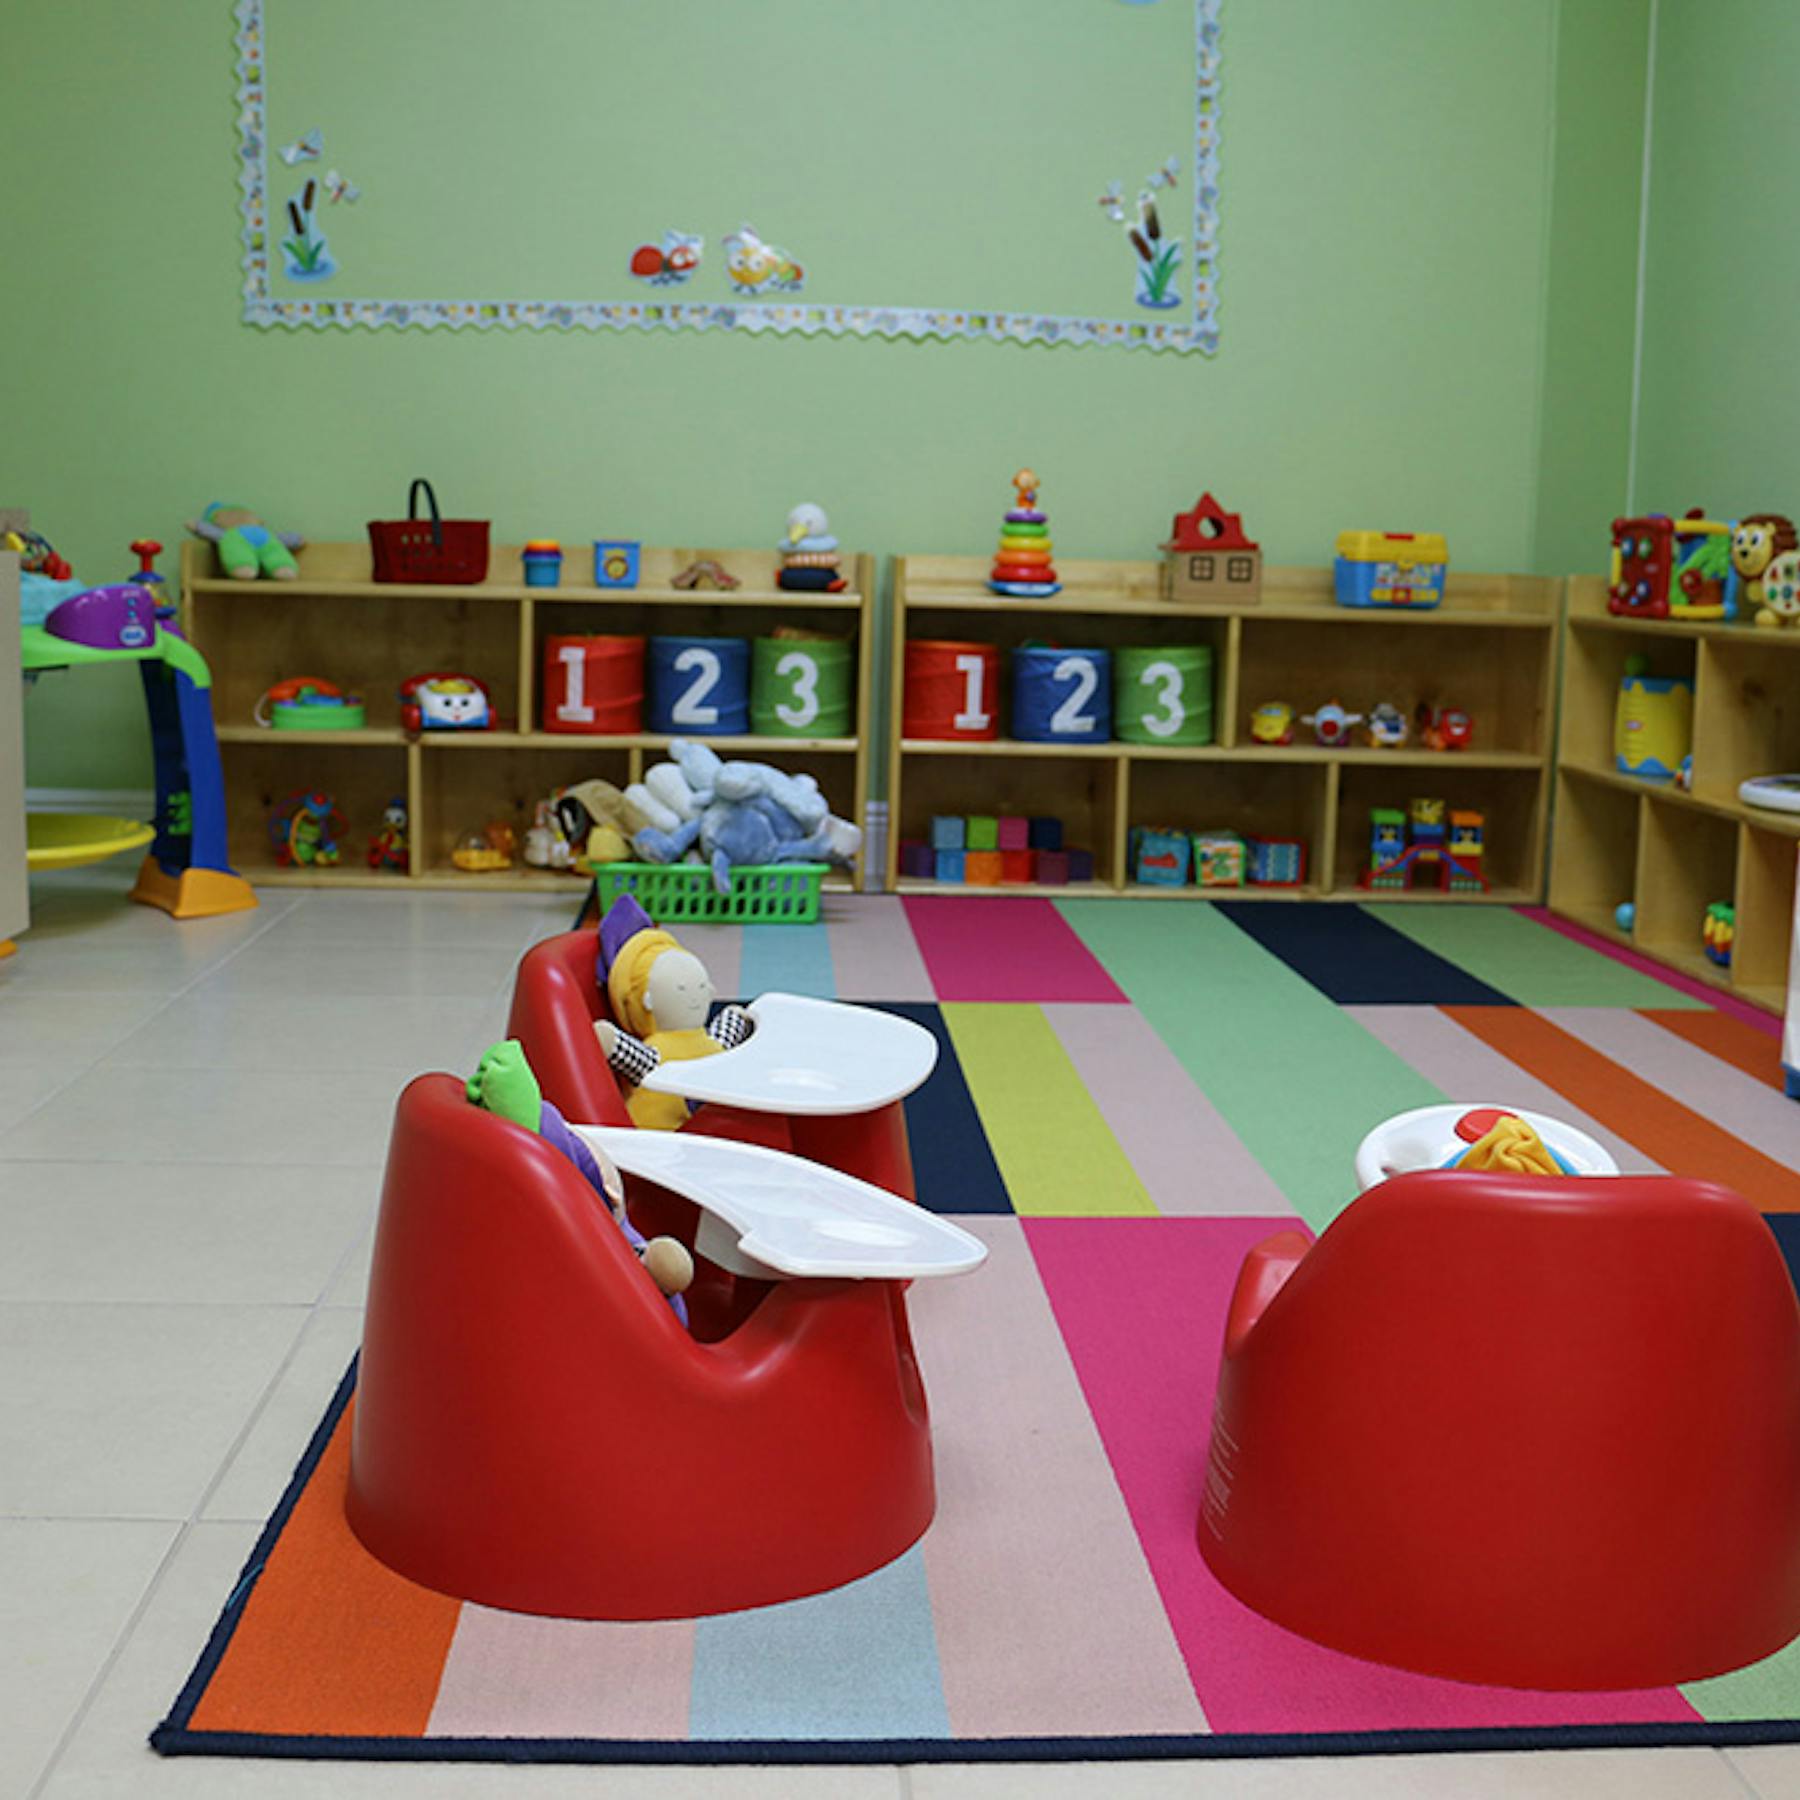 Tiny Steps Day Care Learning Center - Preschool in Miami, FL ...